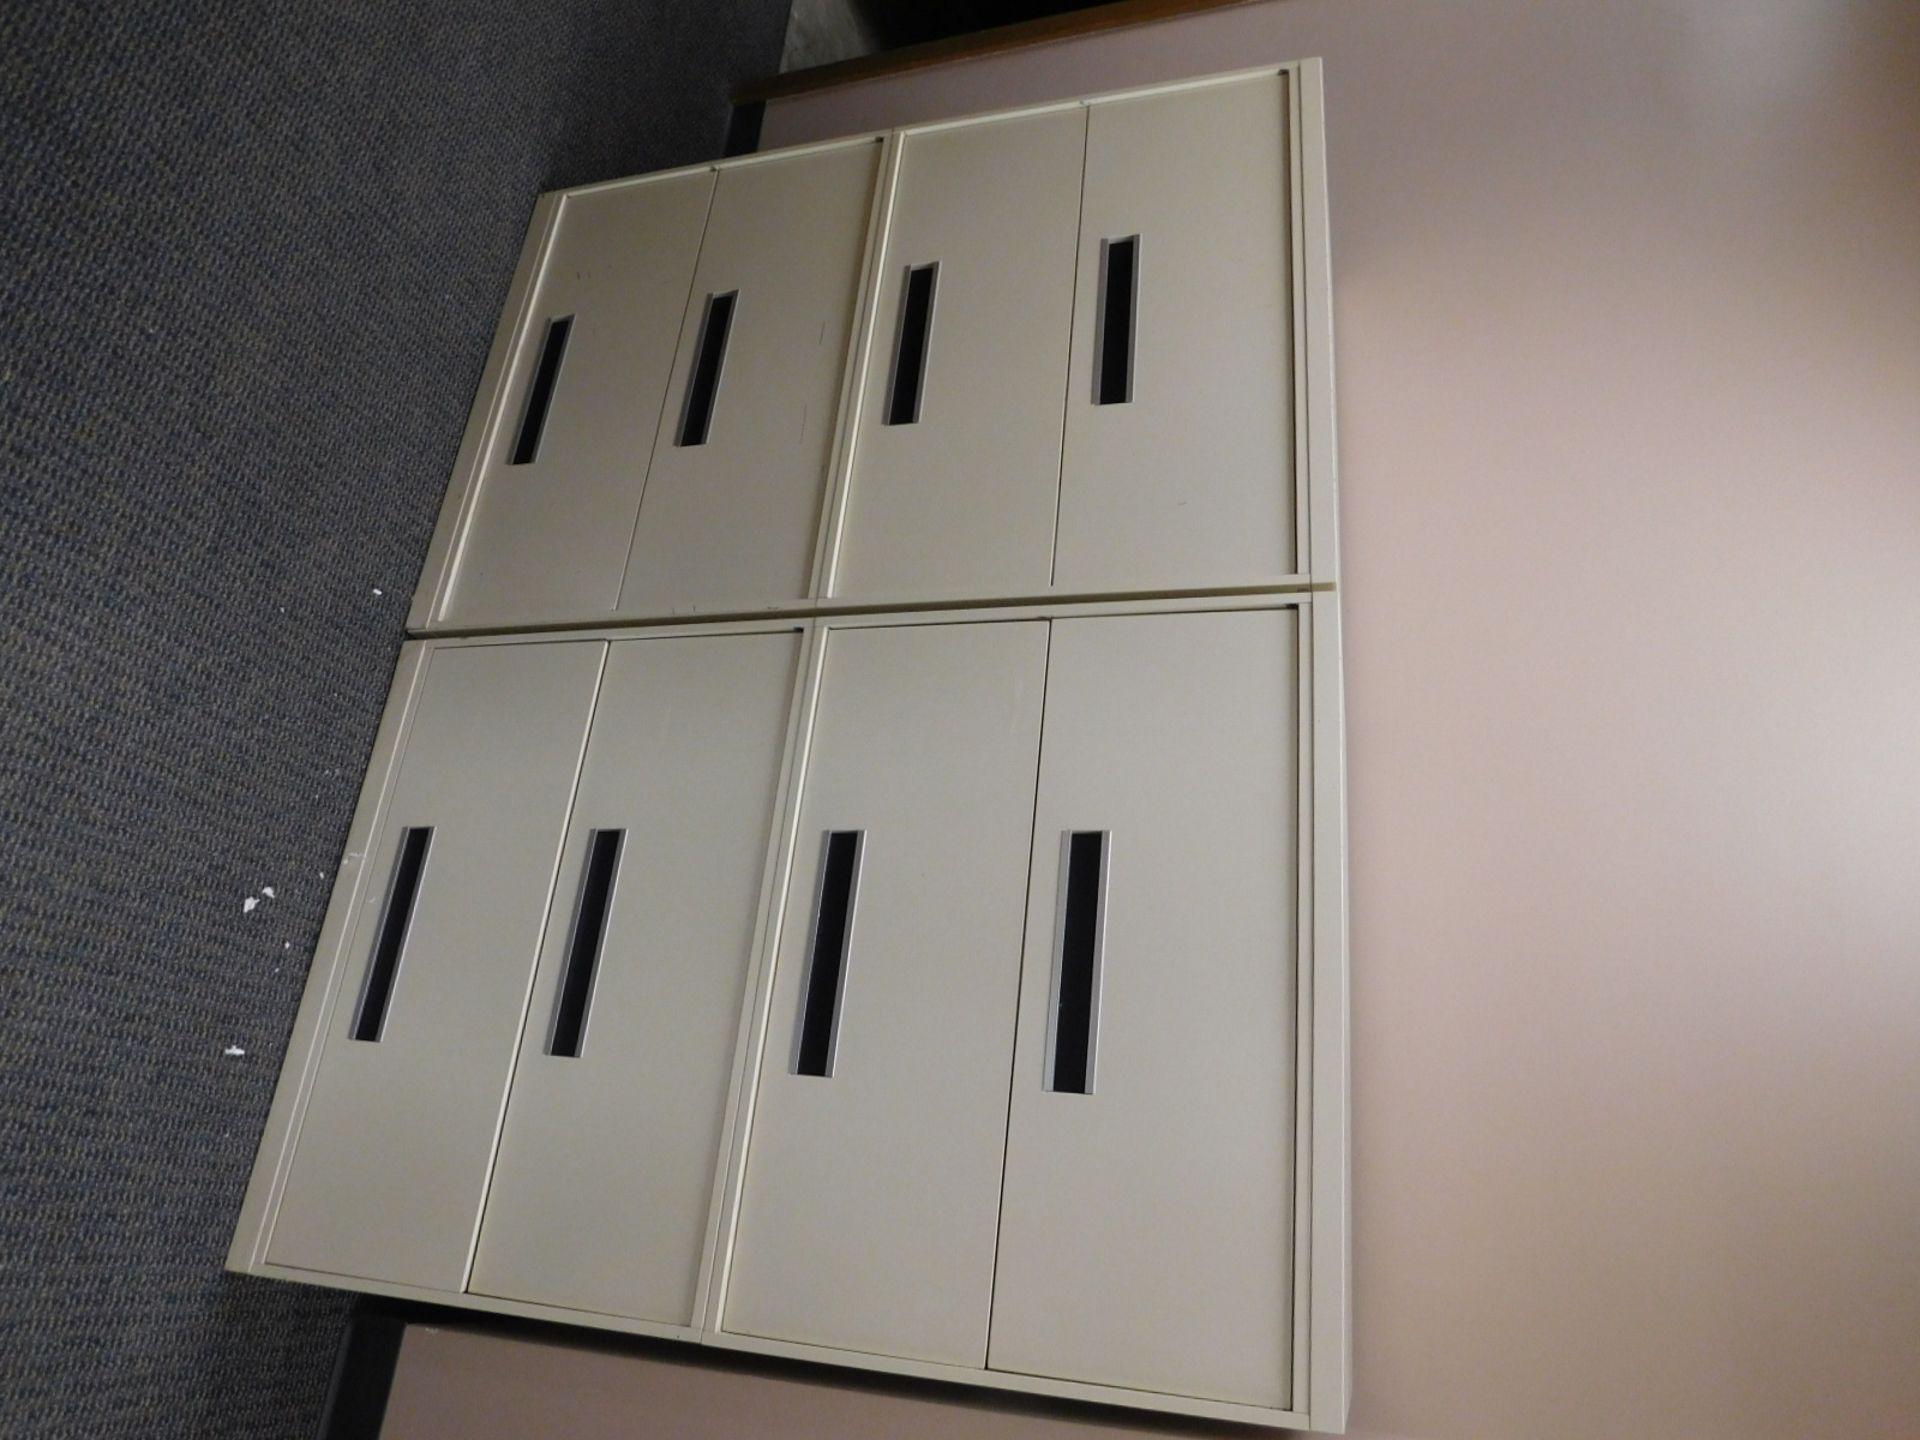 36" WIDE - 4 DRAWER LATERAL FILE CABINET - CHOICE OF 6